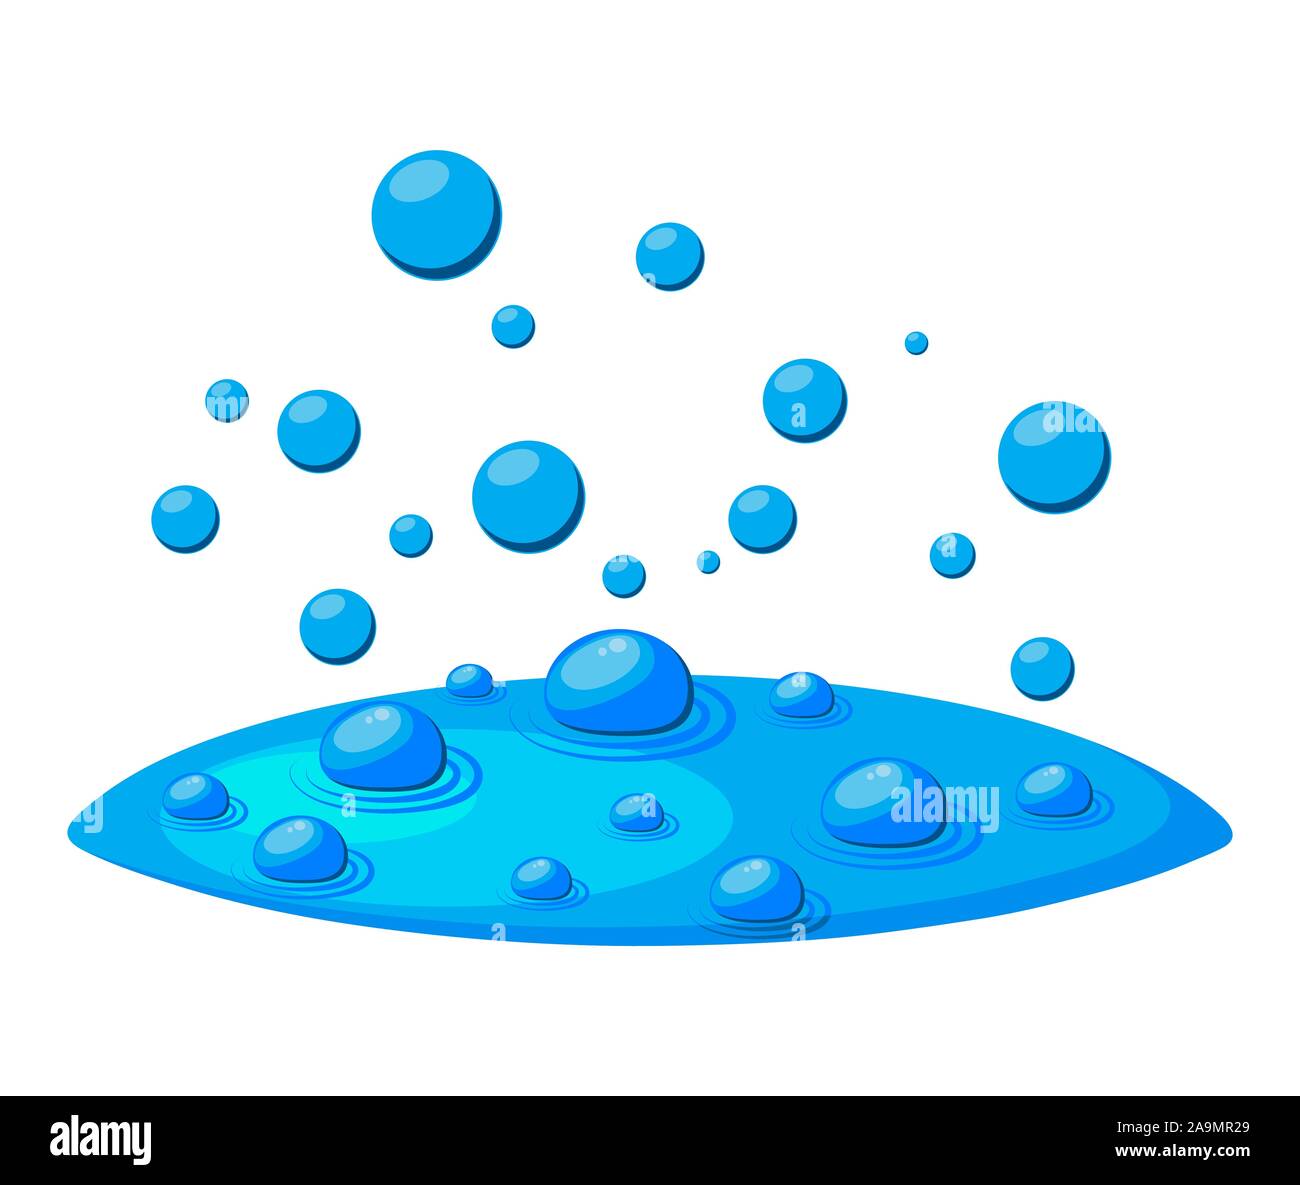 https://c8.alamy.com/comp/2A9MR29/bubbles-water-template-for-boiling-soup-blue-fumes-float-vapor-isolated-on-white-background-2A9MR29.jpg